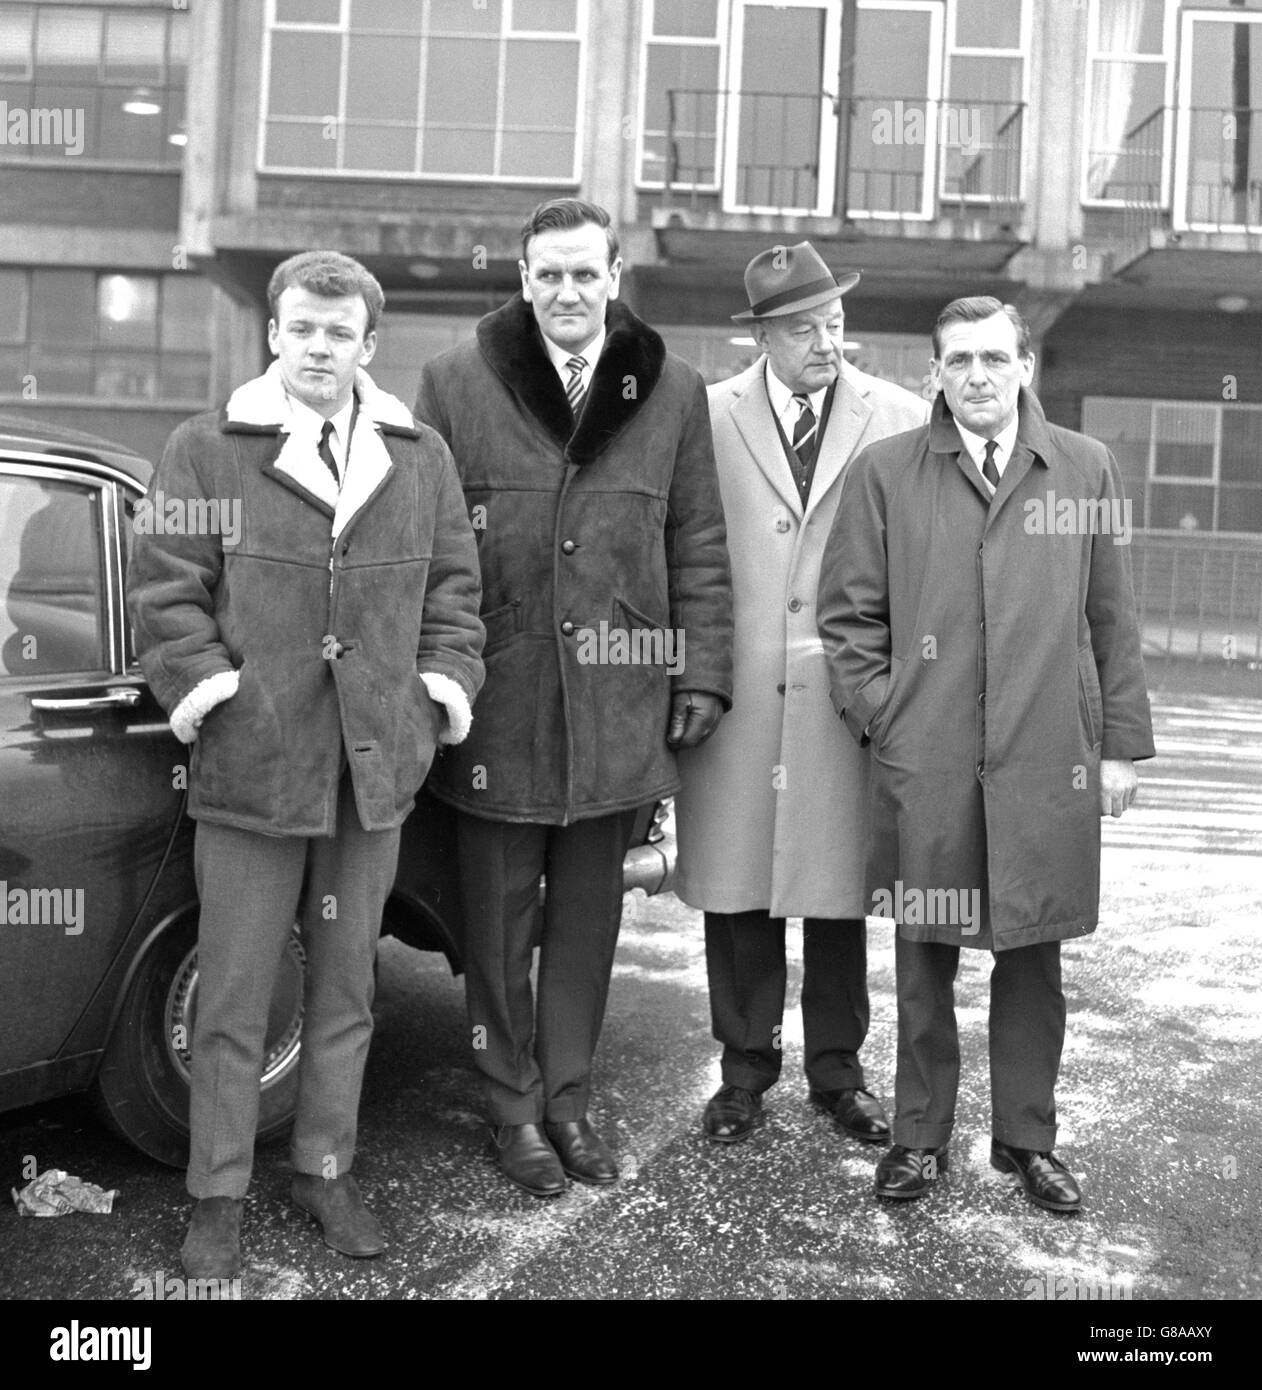 Billy Bremner and Leeds United officials leave Elland Road for Sheffield, where the player is to make a personal appearance before the FA Disciplinary Committee. (l-r) Billy Bremner, manager Don Revie, secretary Cyril Williamson, and trainer Les Cocker. Stock Photo